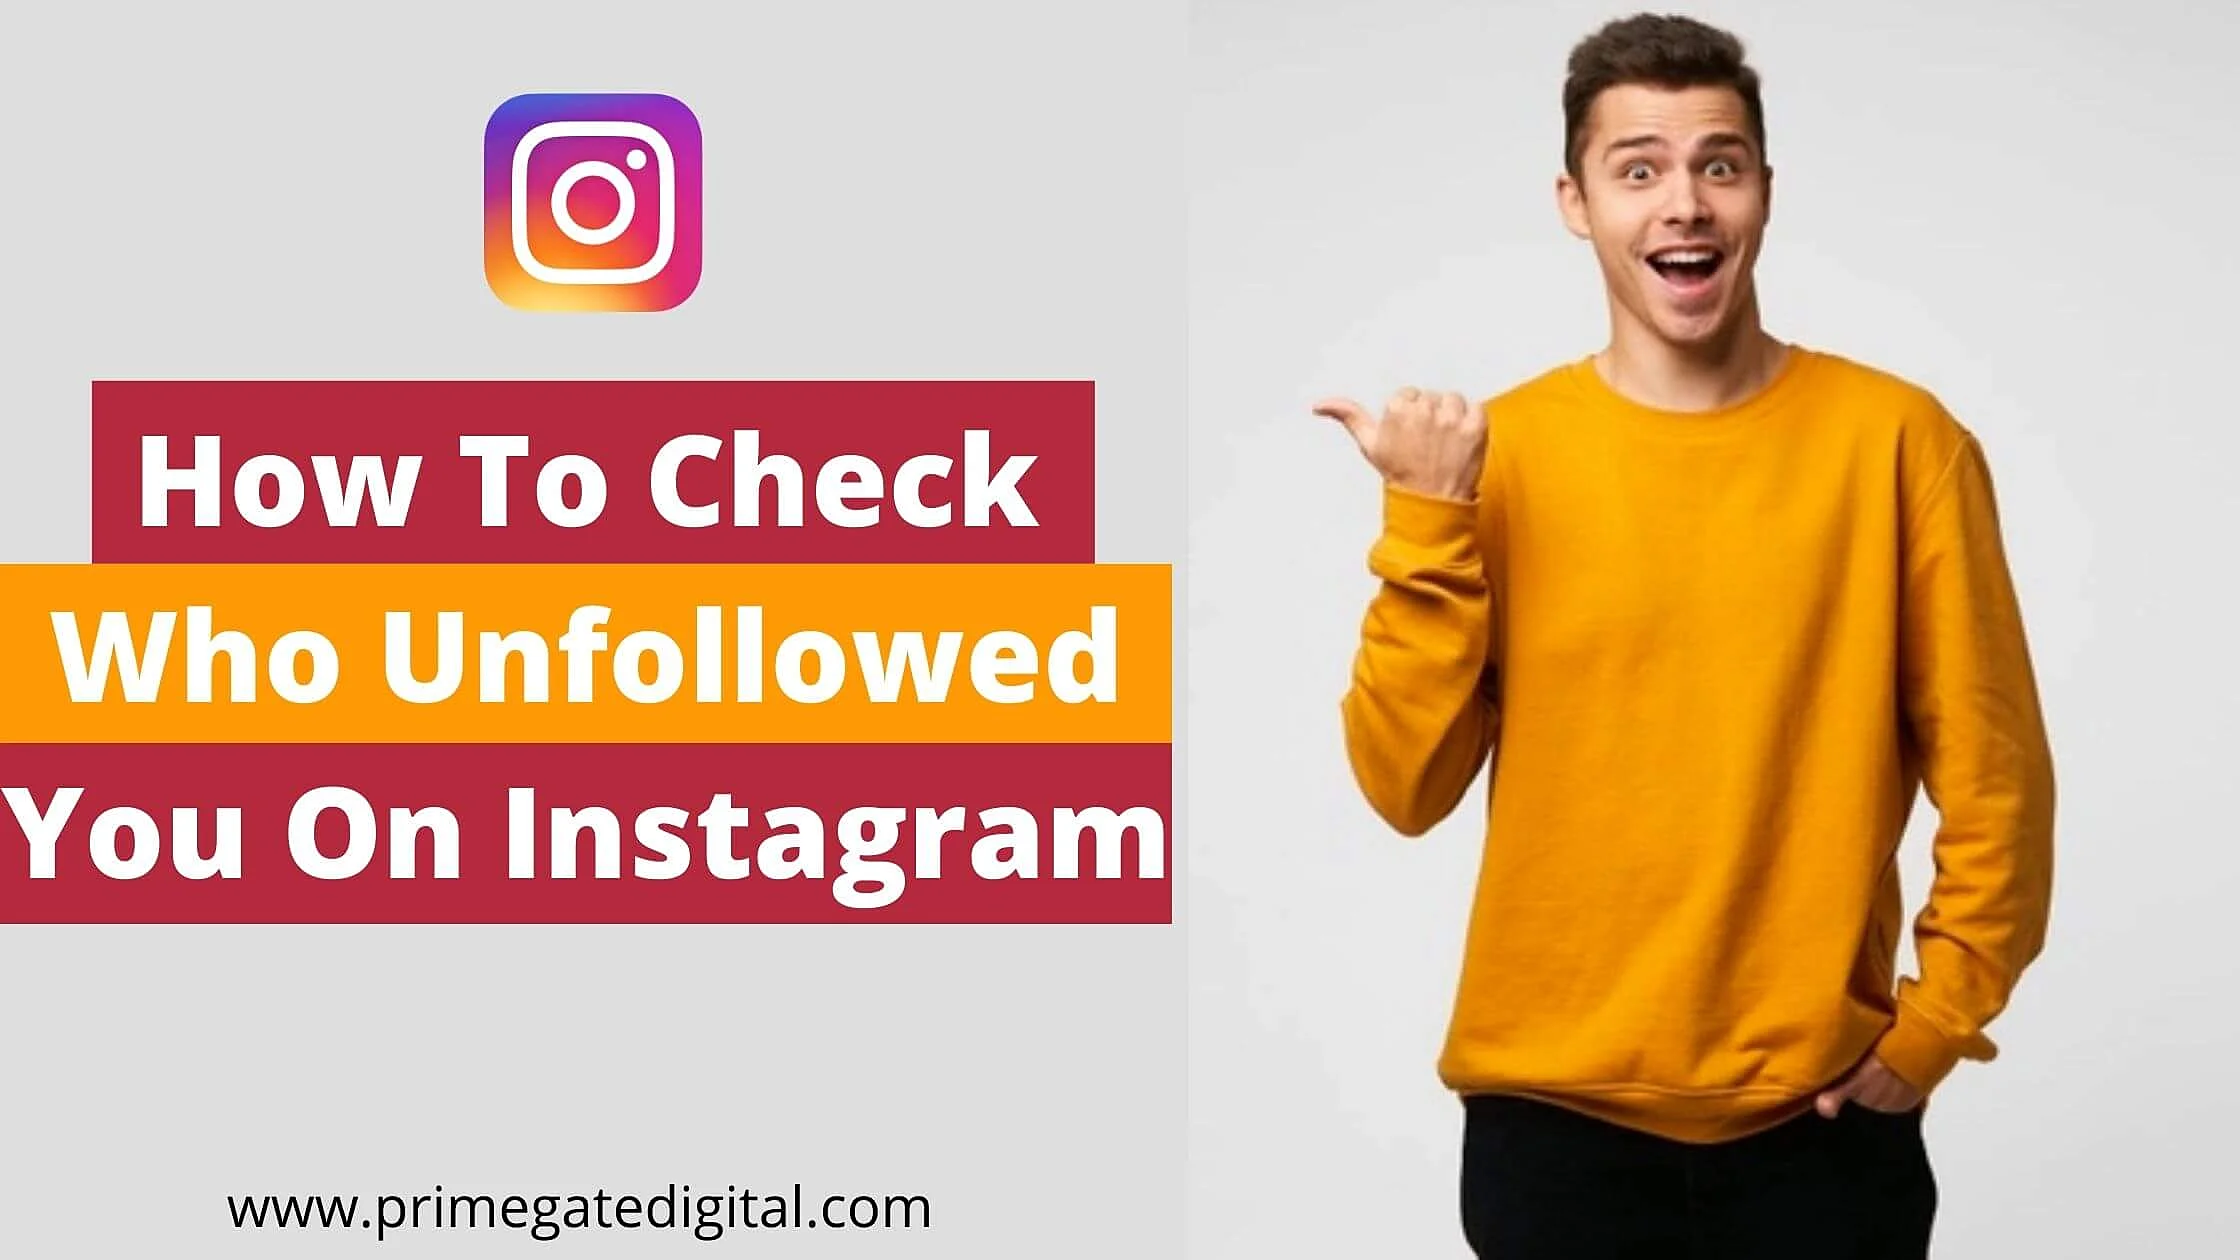 How To Check Who Unfollowed You On Instagram